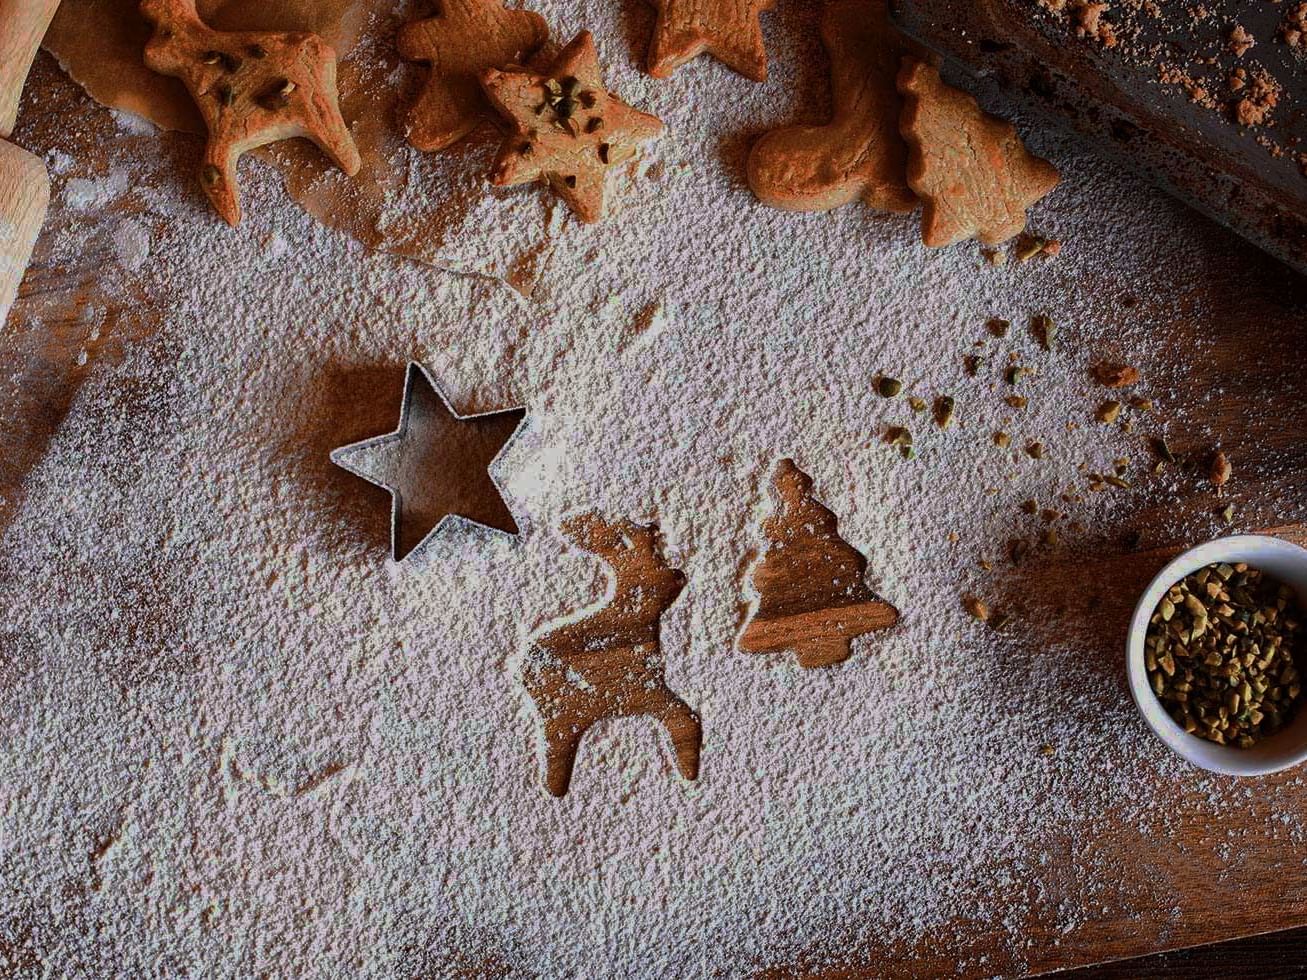 Rome on a Plate: Traditional Christmas Desserts